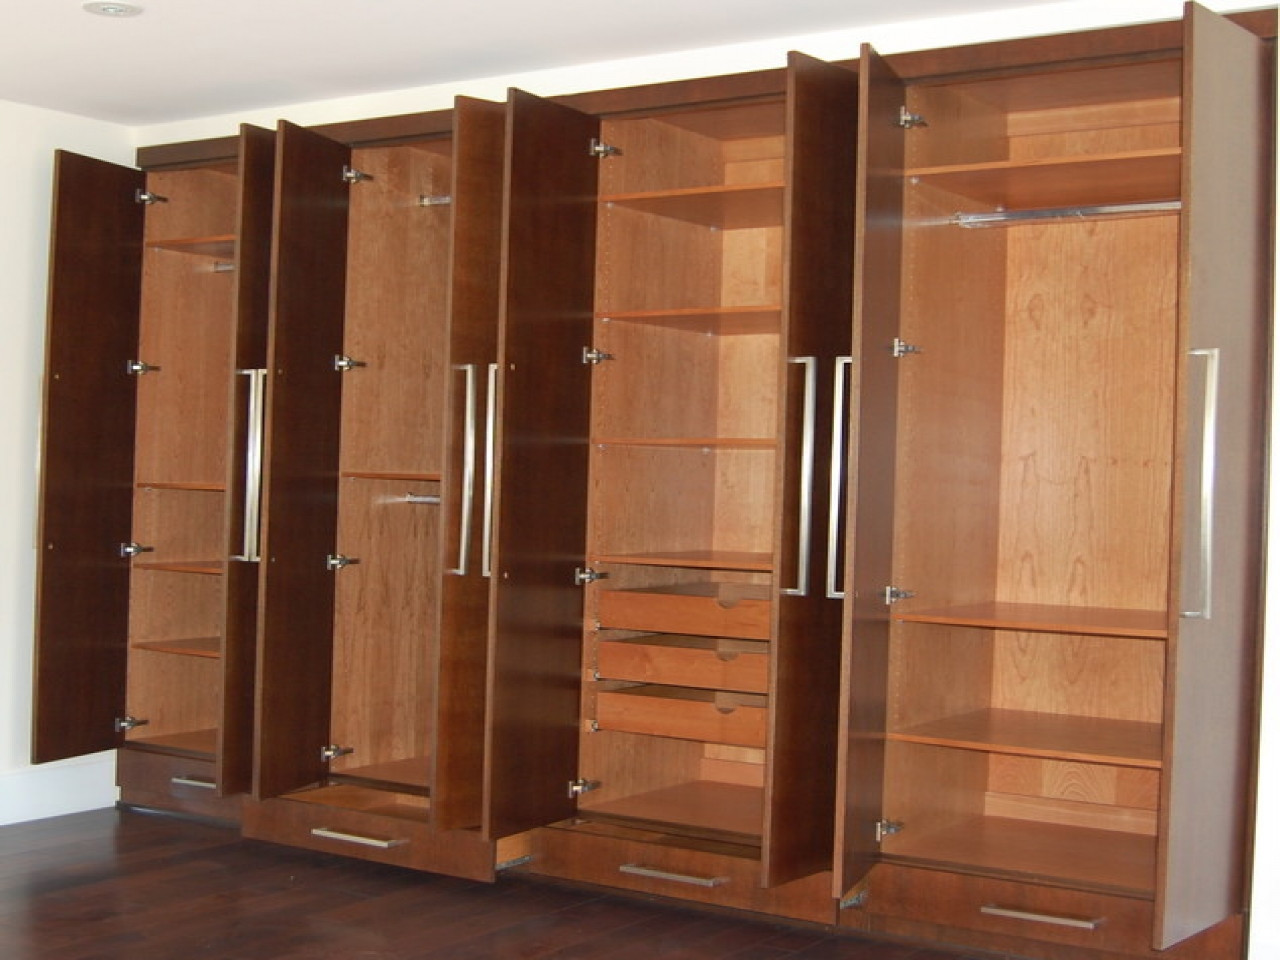 Bedroom Wardrobe Cabinet
 Wall of closets storage cabinets bedroom and closets